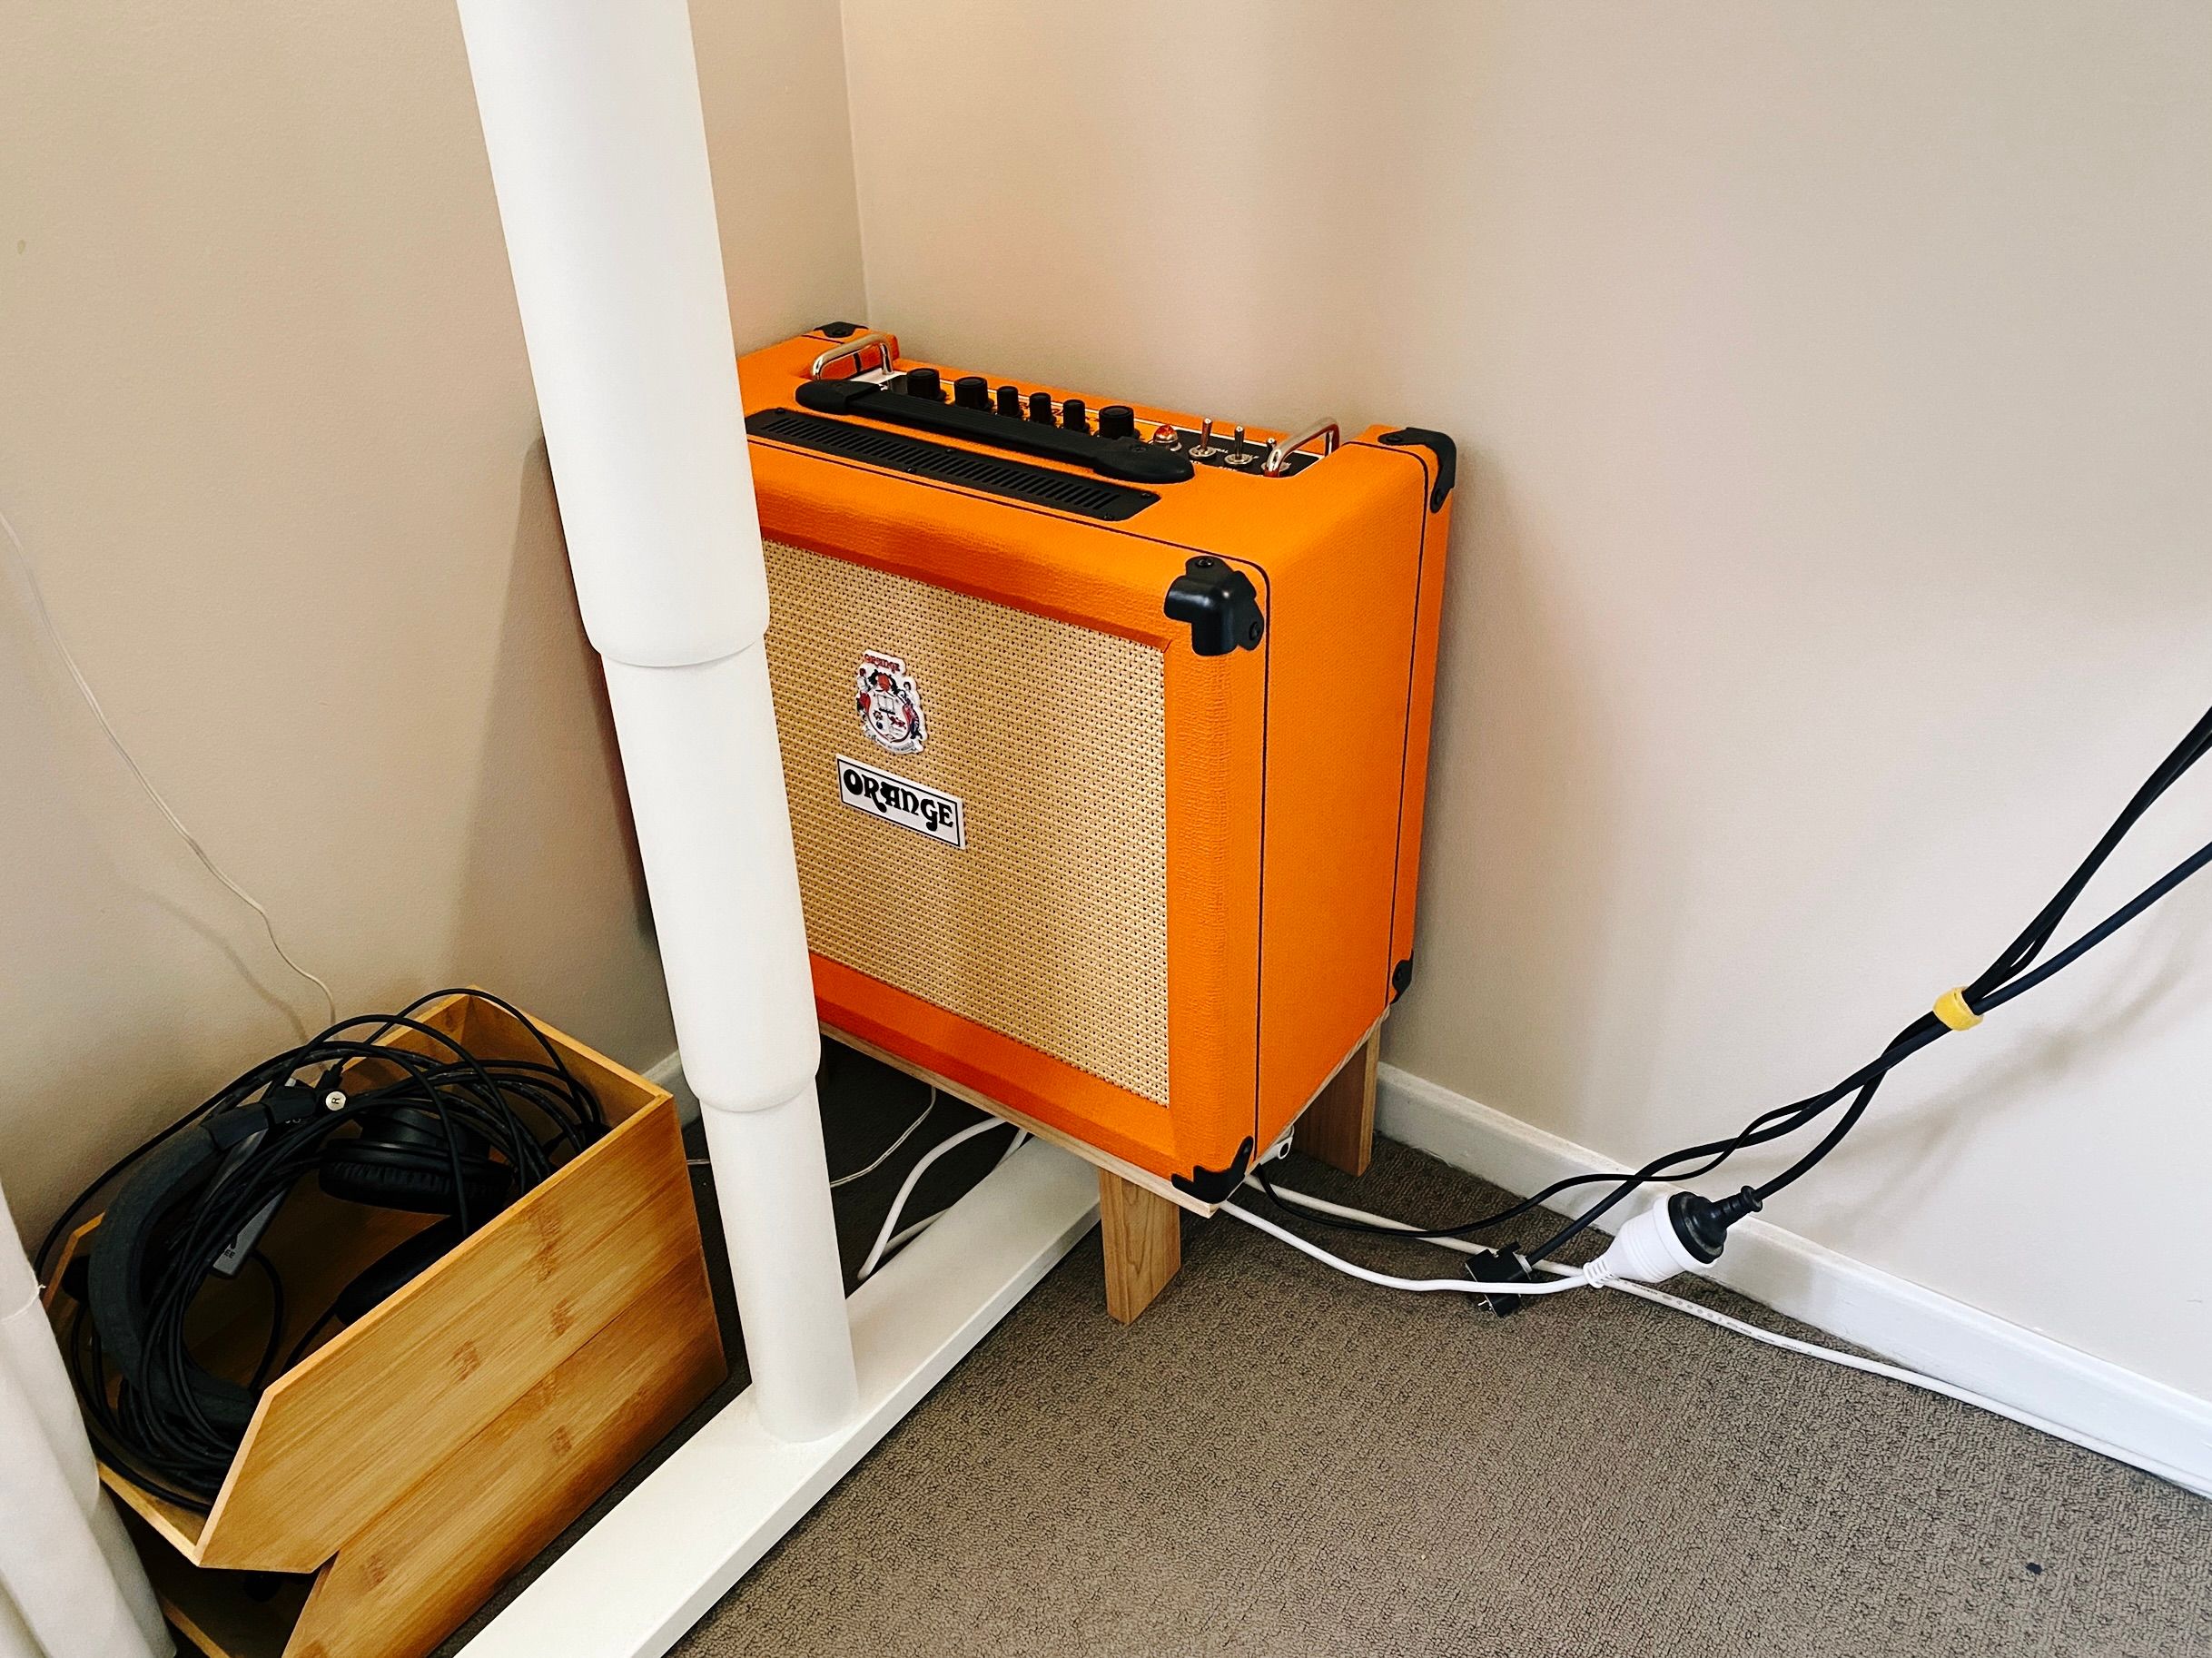 The same orange guitar amp but this time sitting on a little elevated wooden platform in the corner of a room under a standing desk.